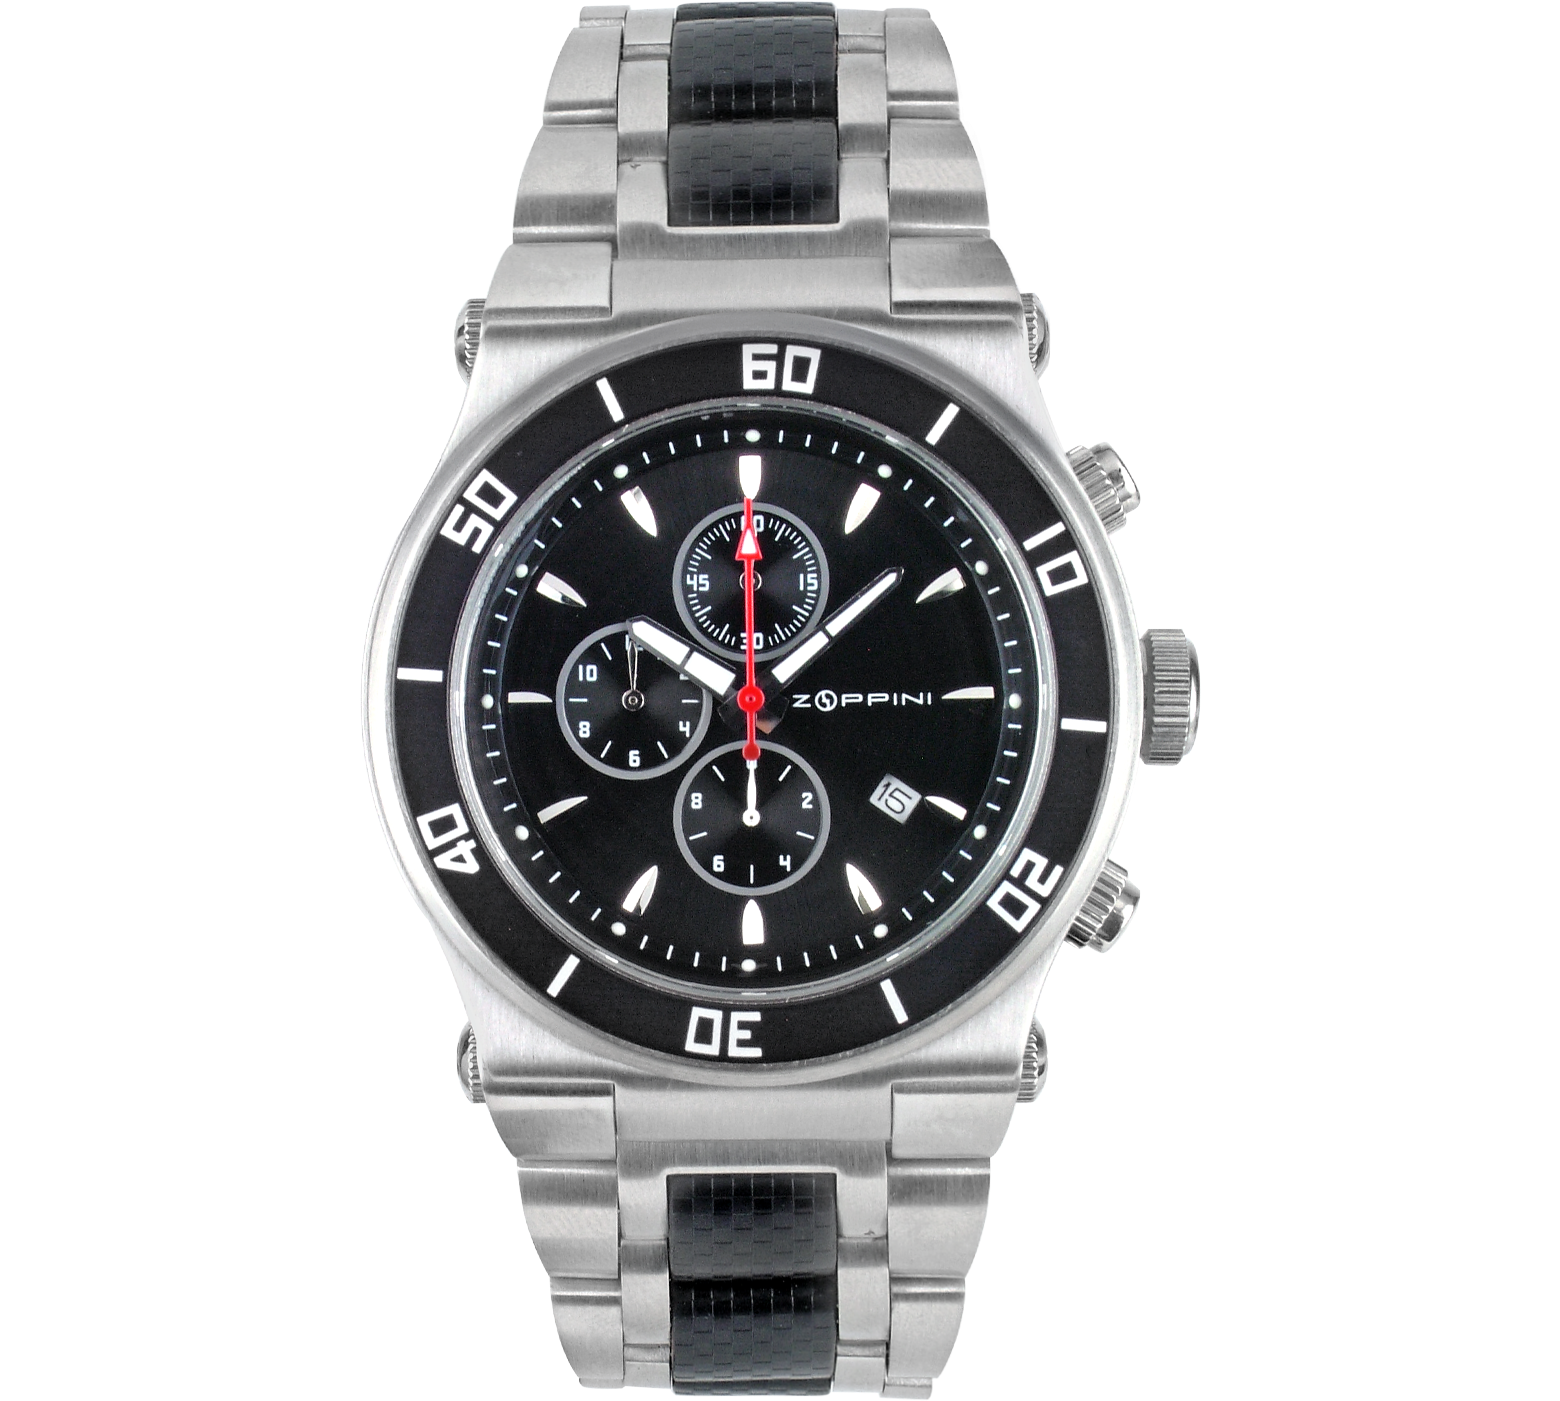 Zoppini Time - Brushed Stainless Steel and Rubber Chronograph Watch at ...